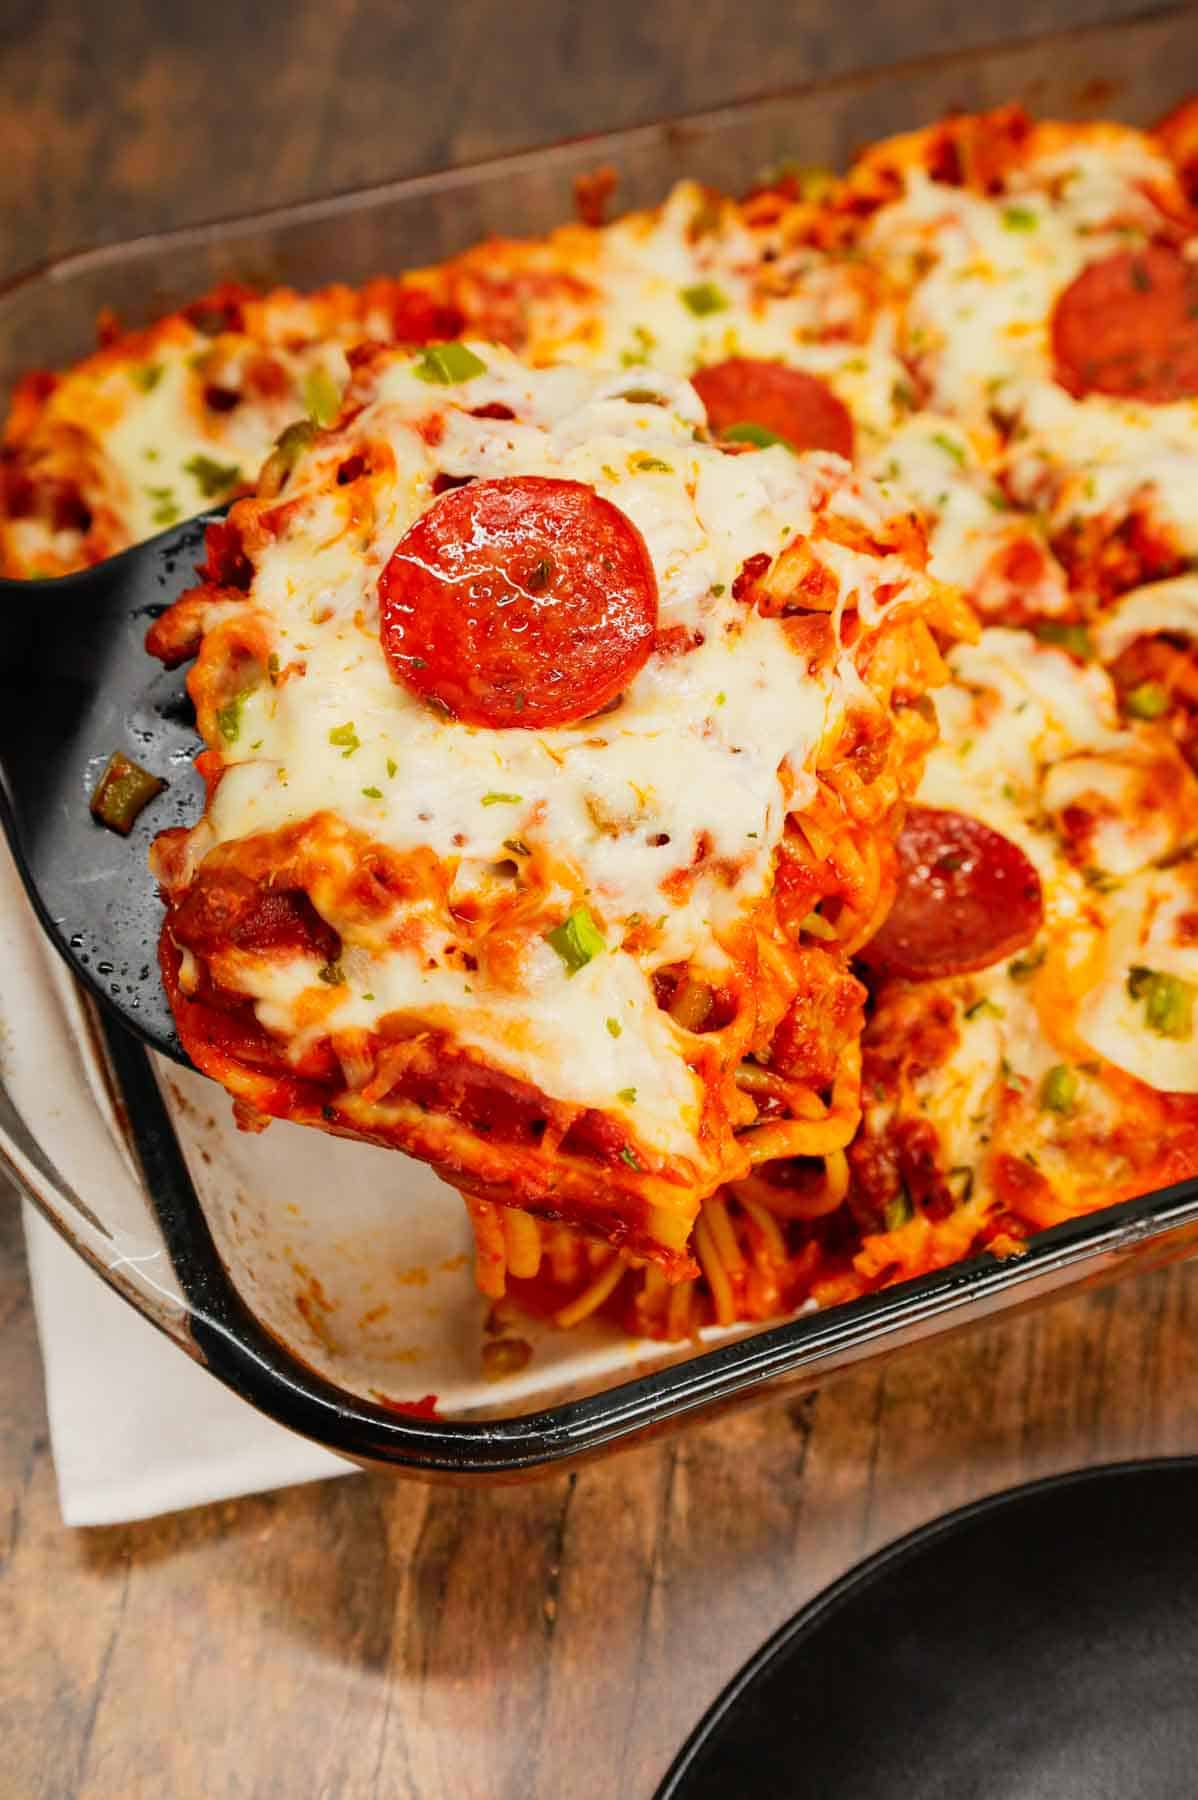 Pizza Baked Spaghetti is a hearty spaghetti recipe loaded with Italian sausage, pepperoni, green bell peppers, pizza sauce, marinara and mozzarella cheese.